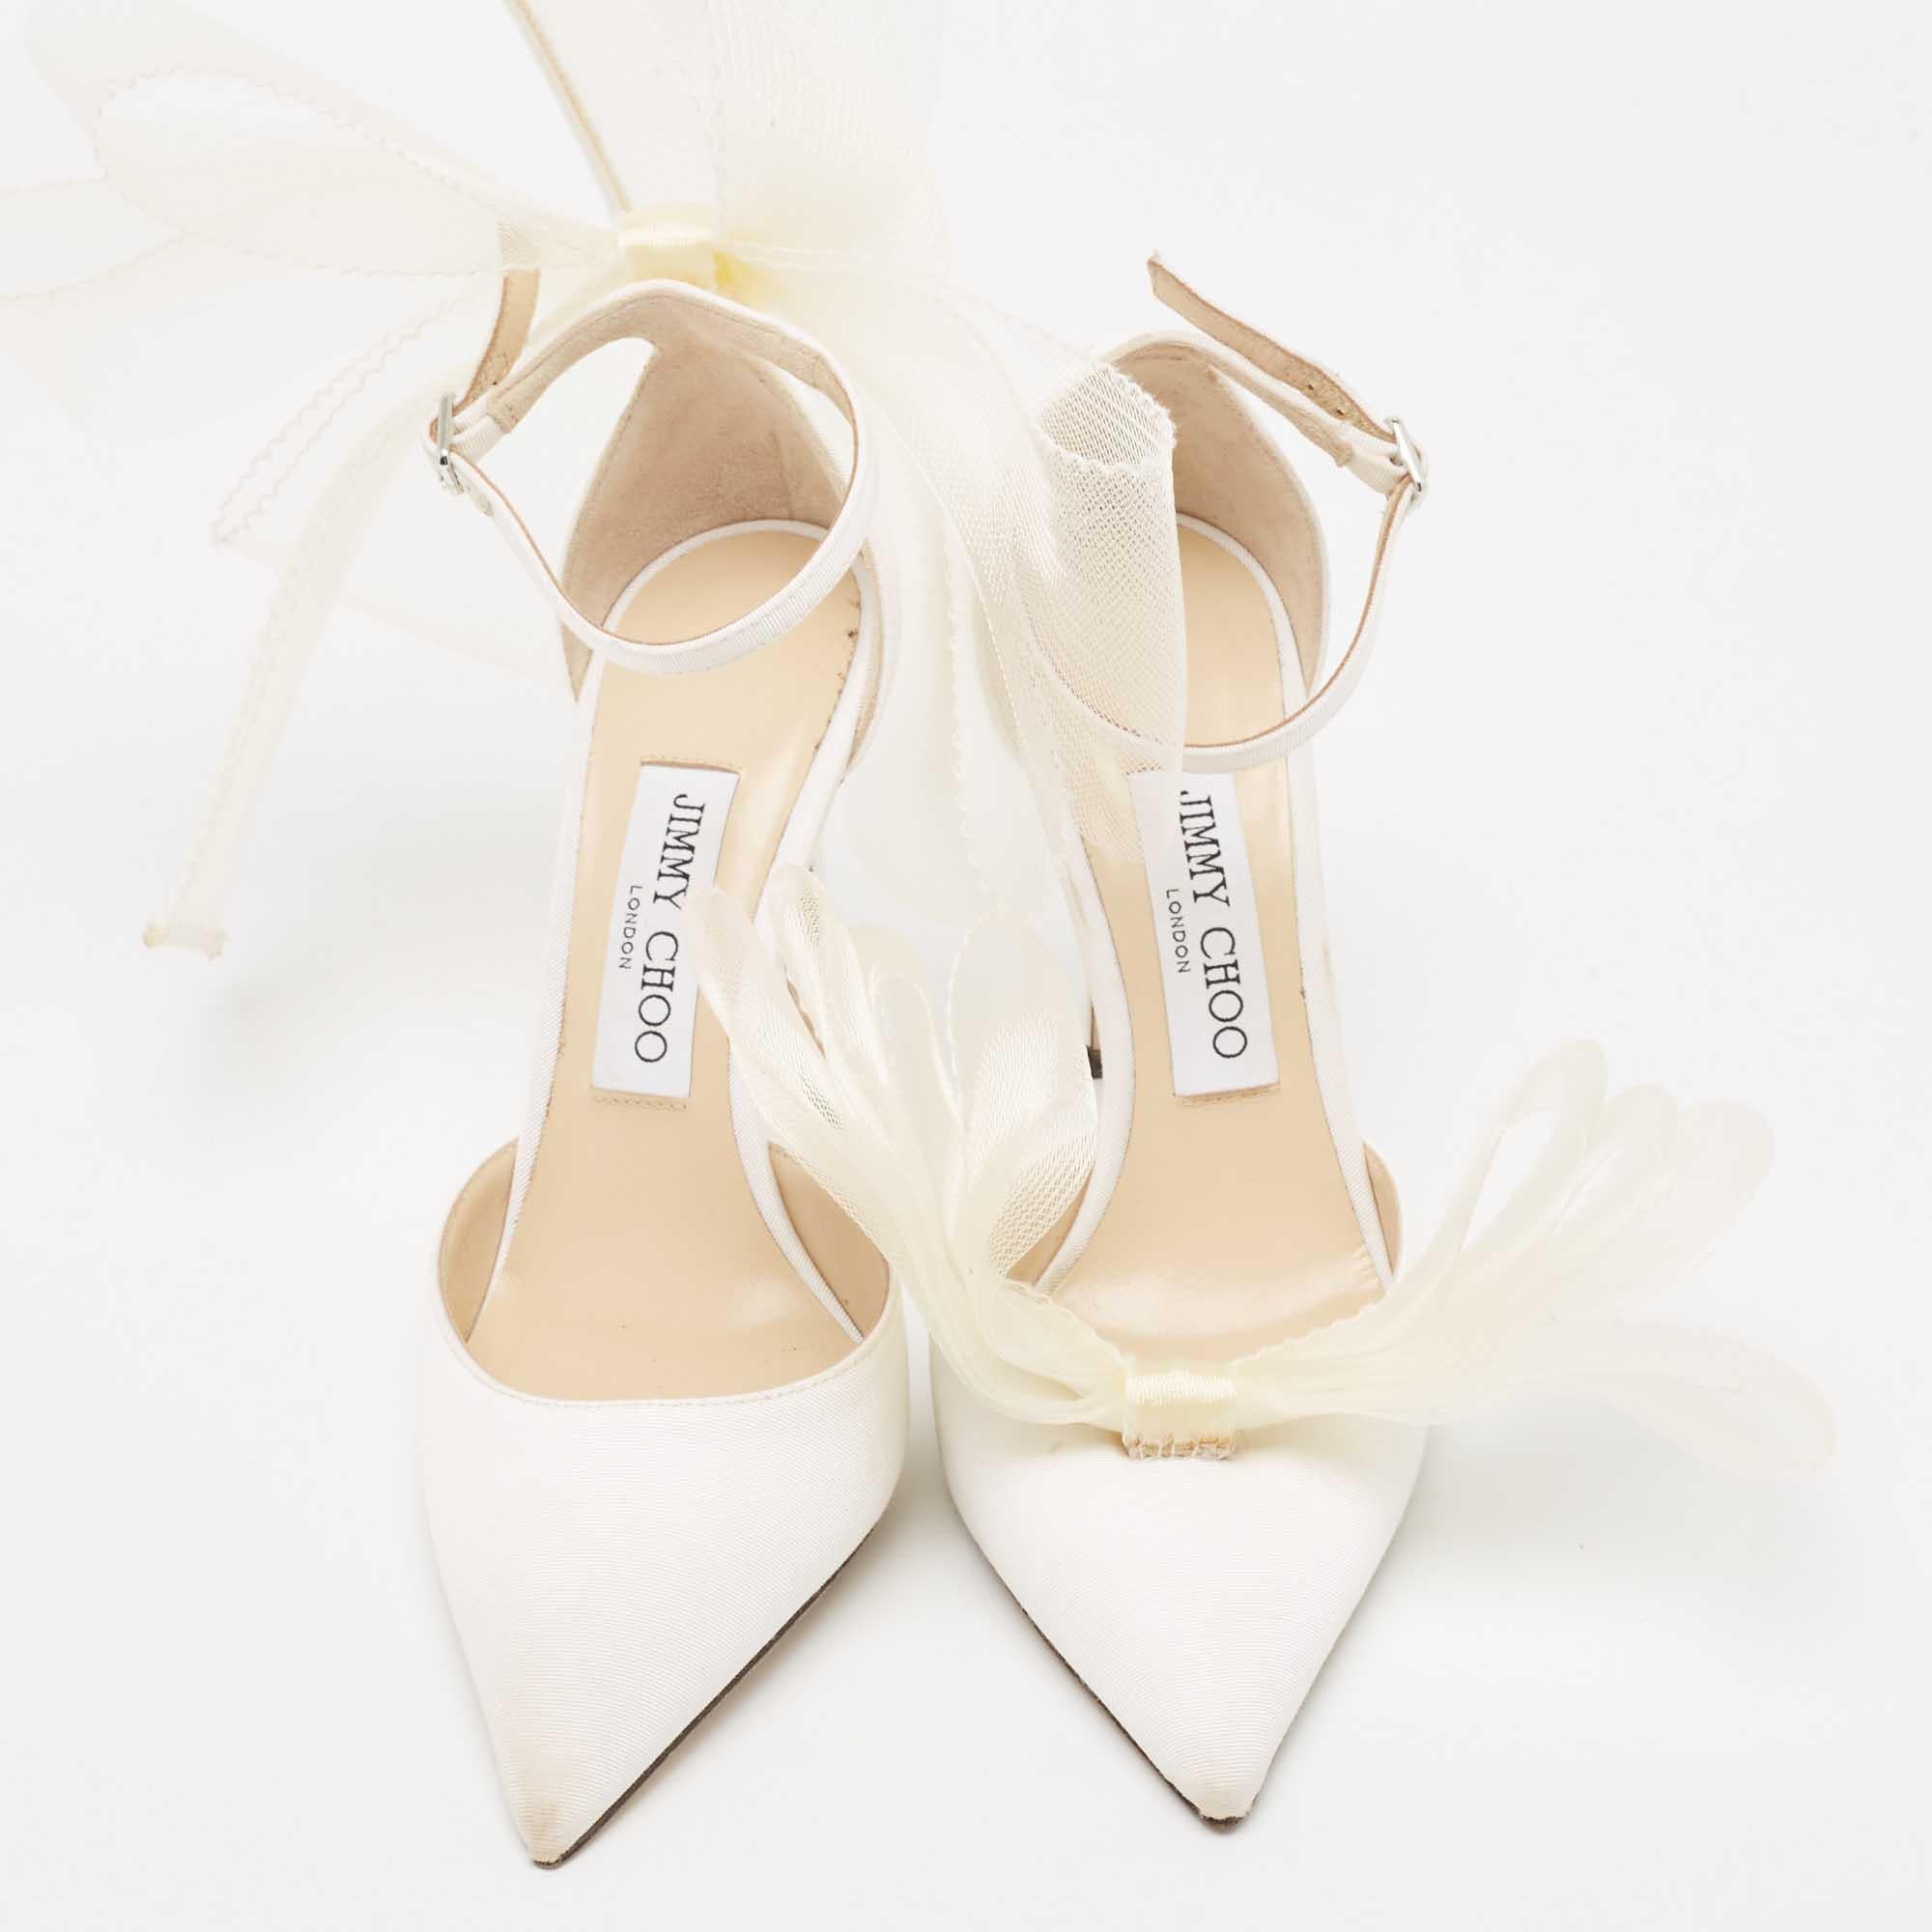 Jimmy Choo White Canvas and Mesh Aveline Bow Ankle Strap Pumps Size 37 1